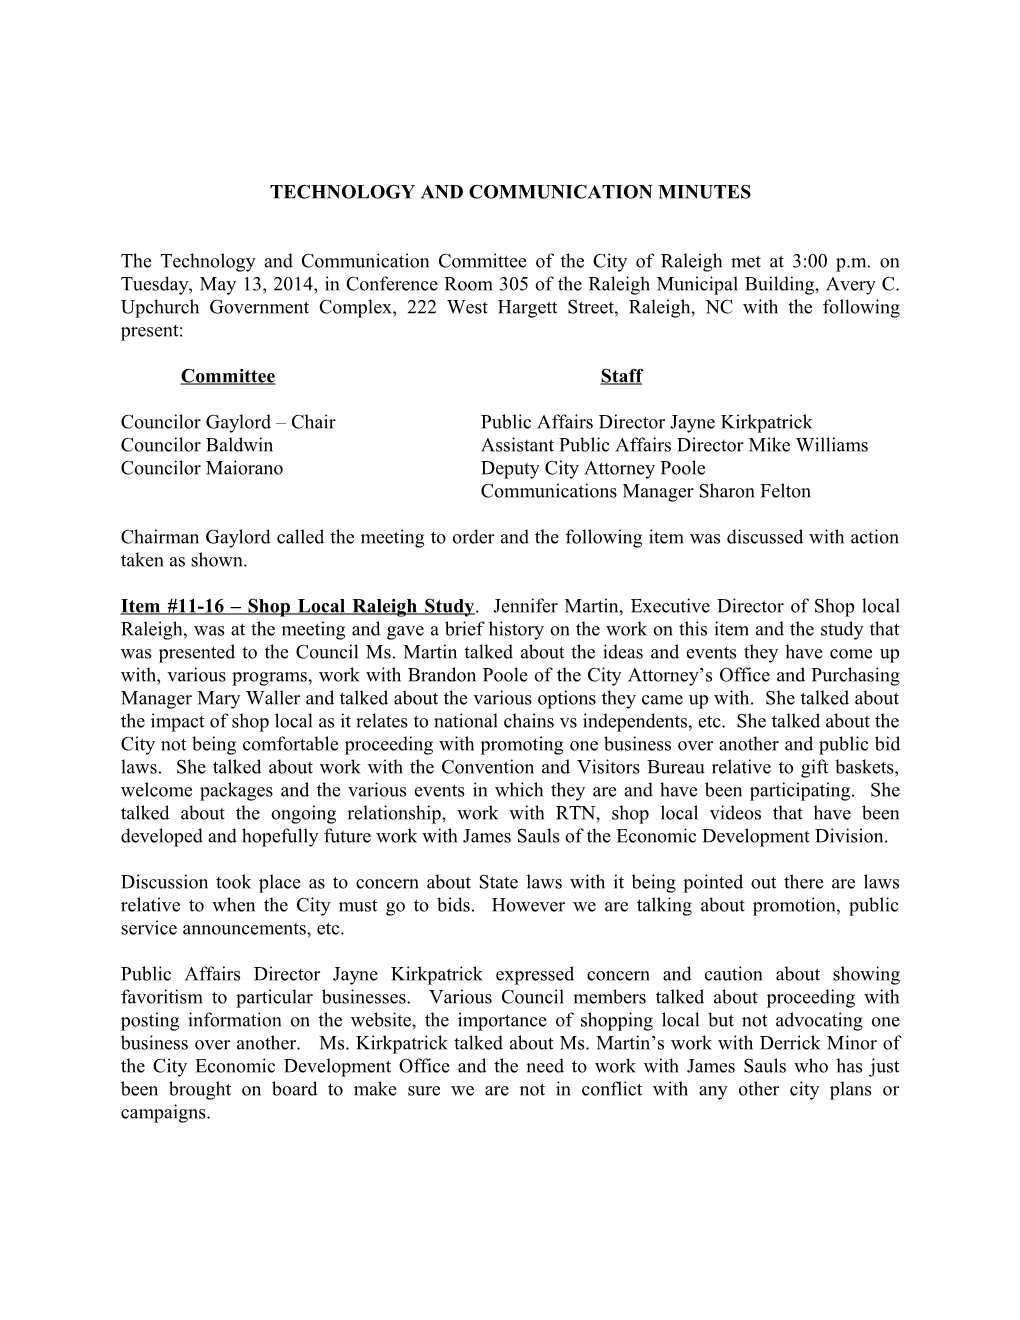 Technology & Communication Committee Minutes - 05/13/2014